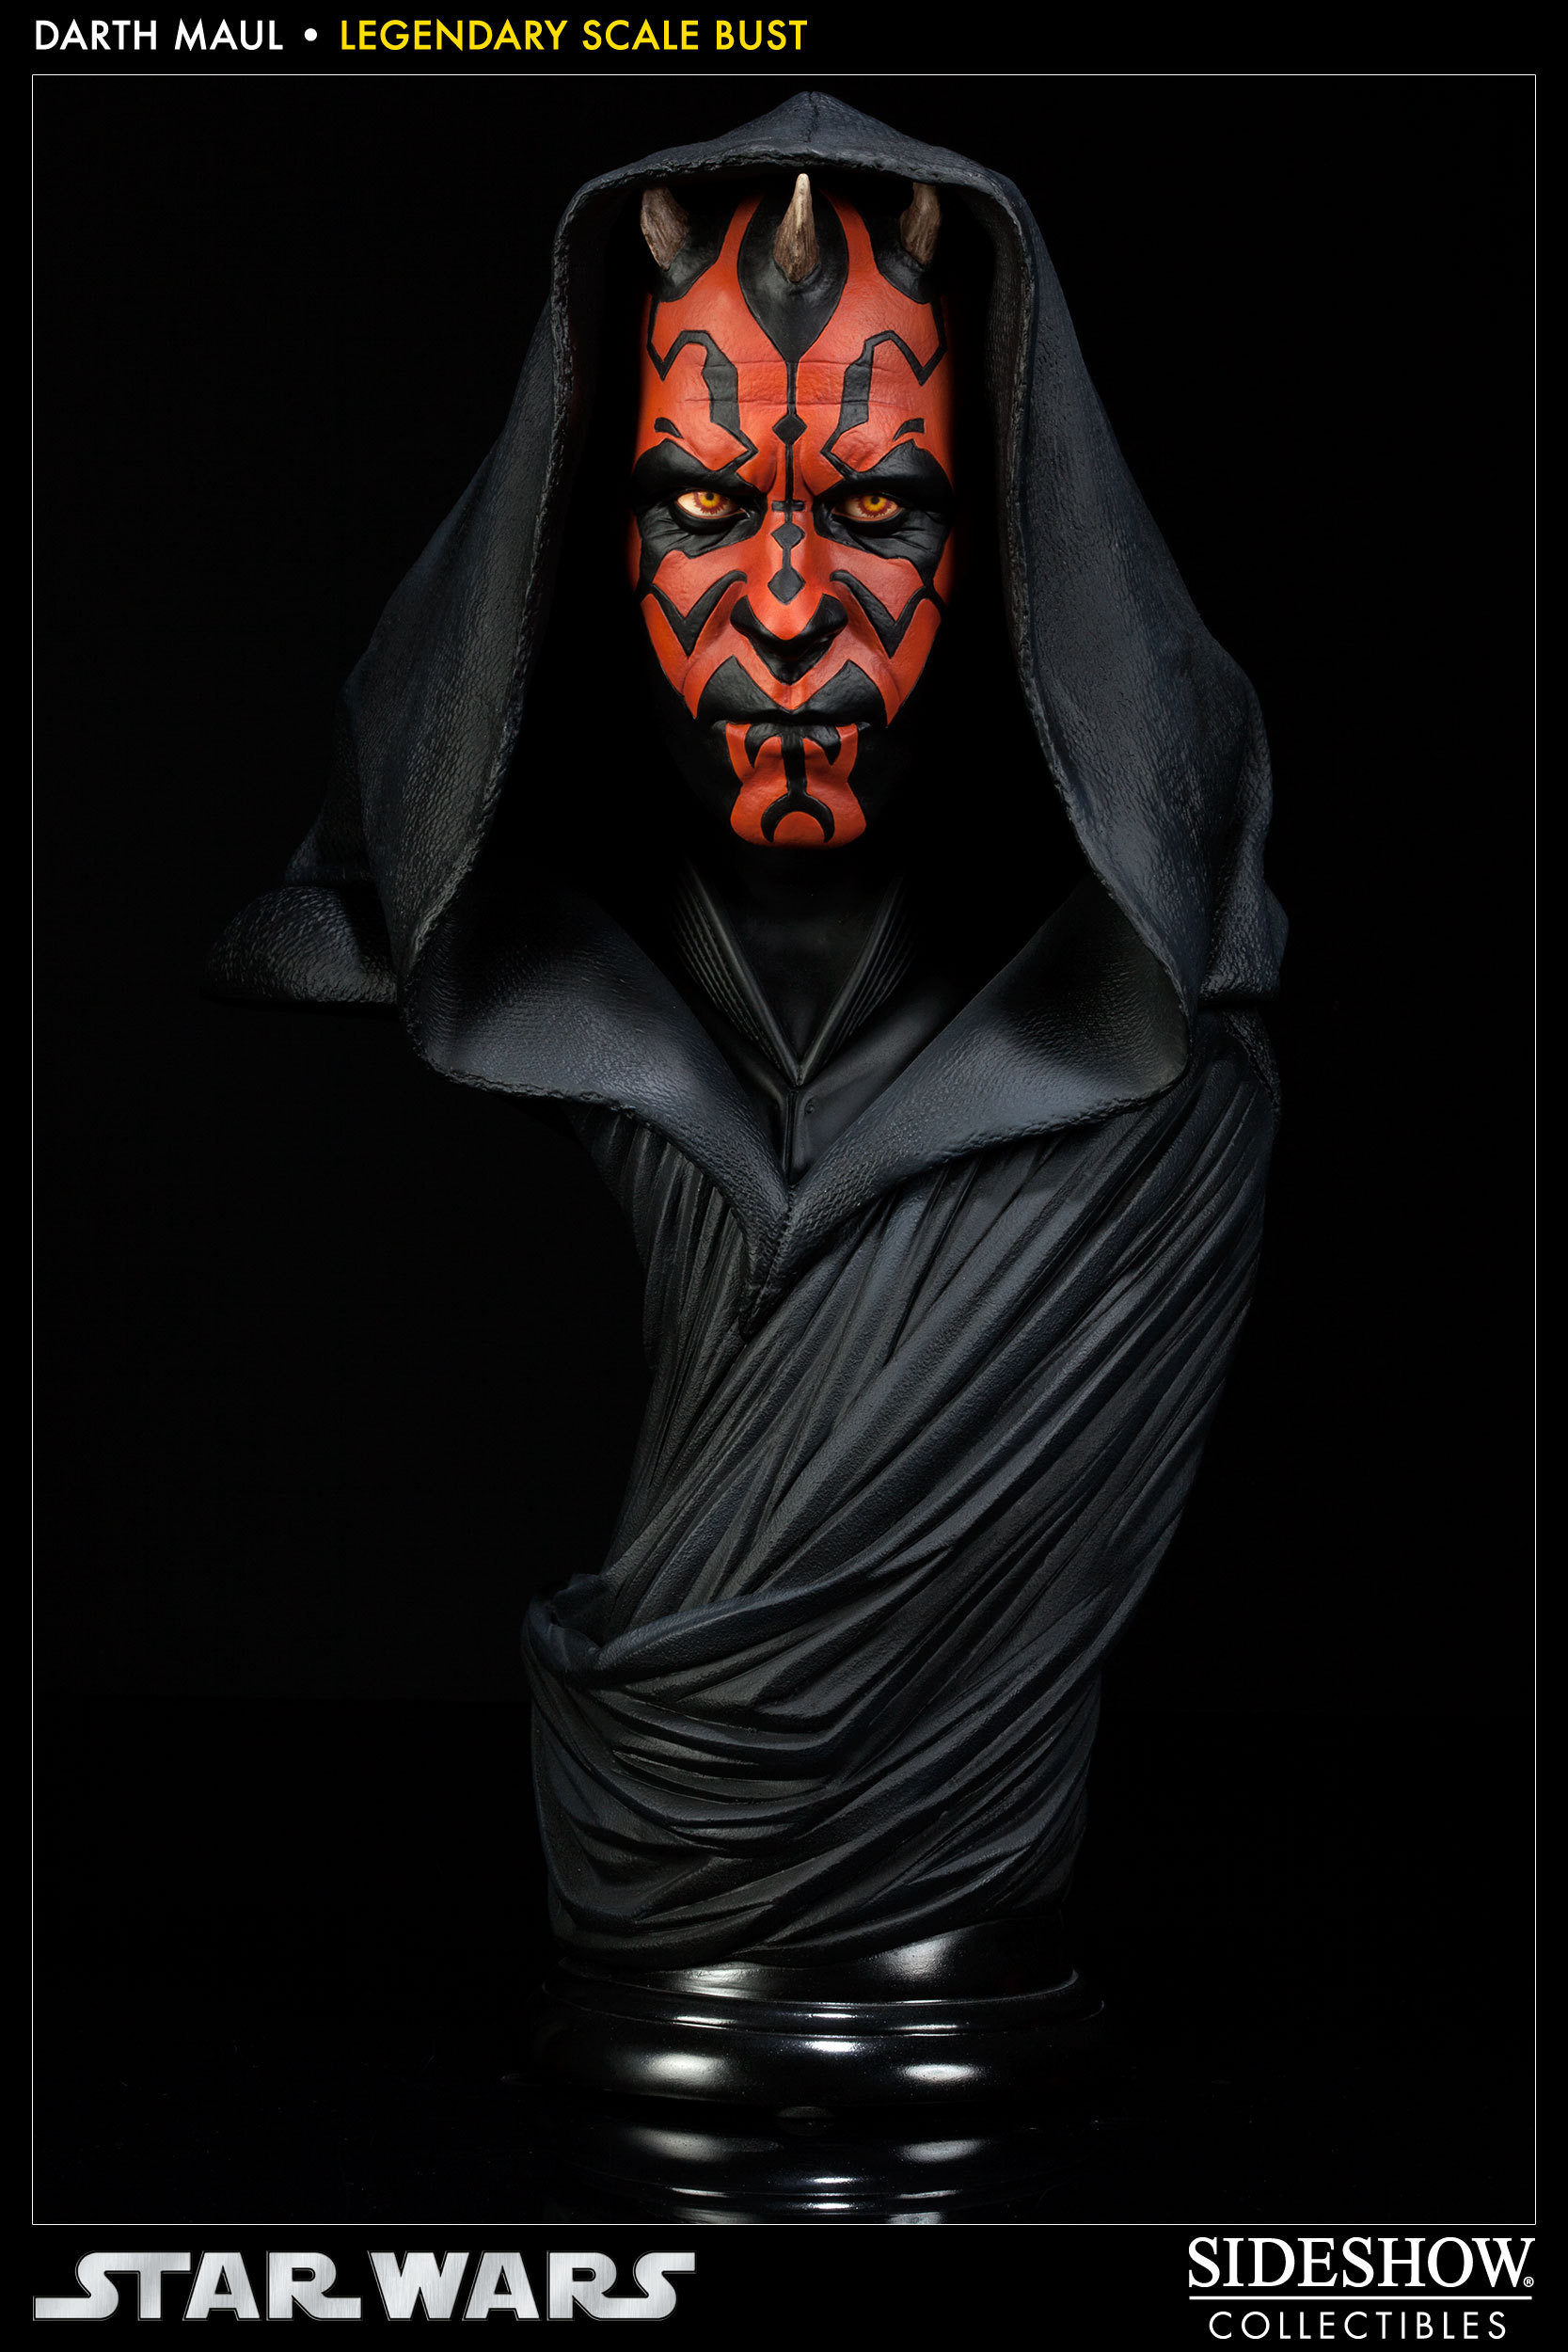 Maul Wallpaper Hd Darth Maul Iphone Wallpapers The Art Mad Wallpapers Darth Maul Legendary Scale Bust Darth Maul Legendary Scale Bust